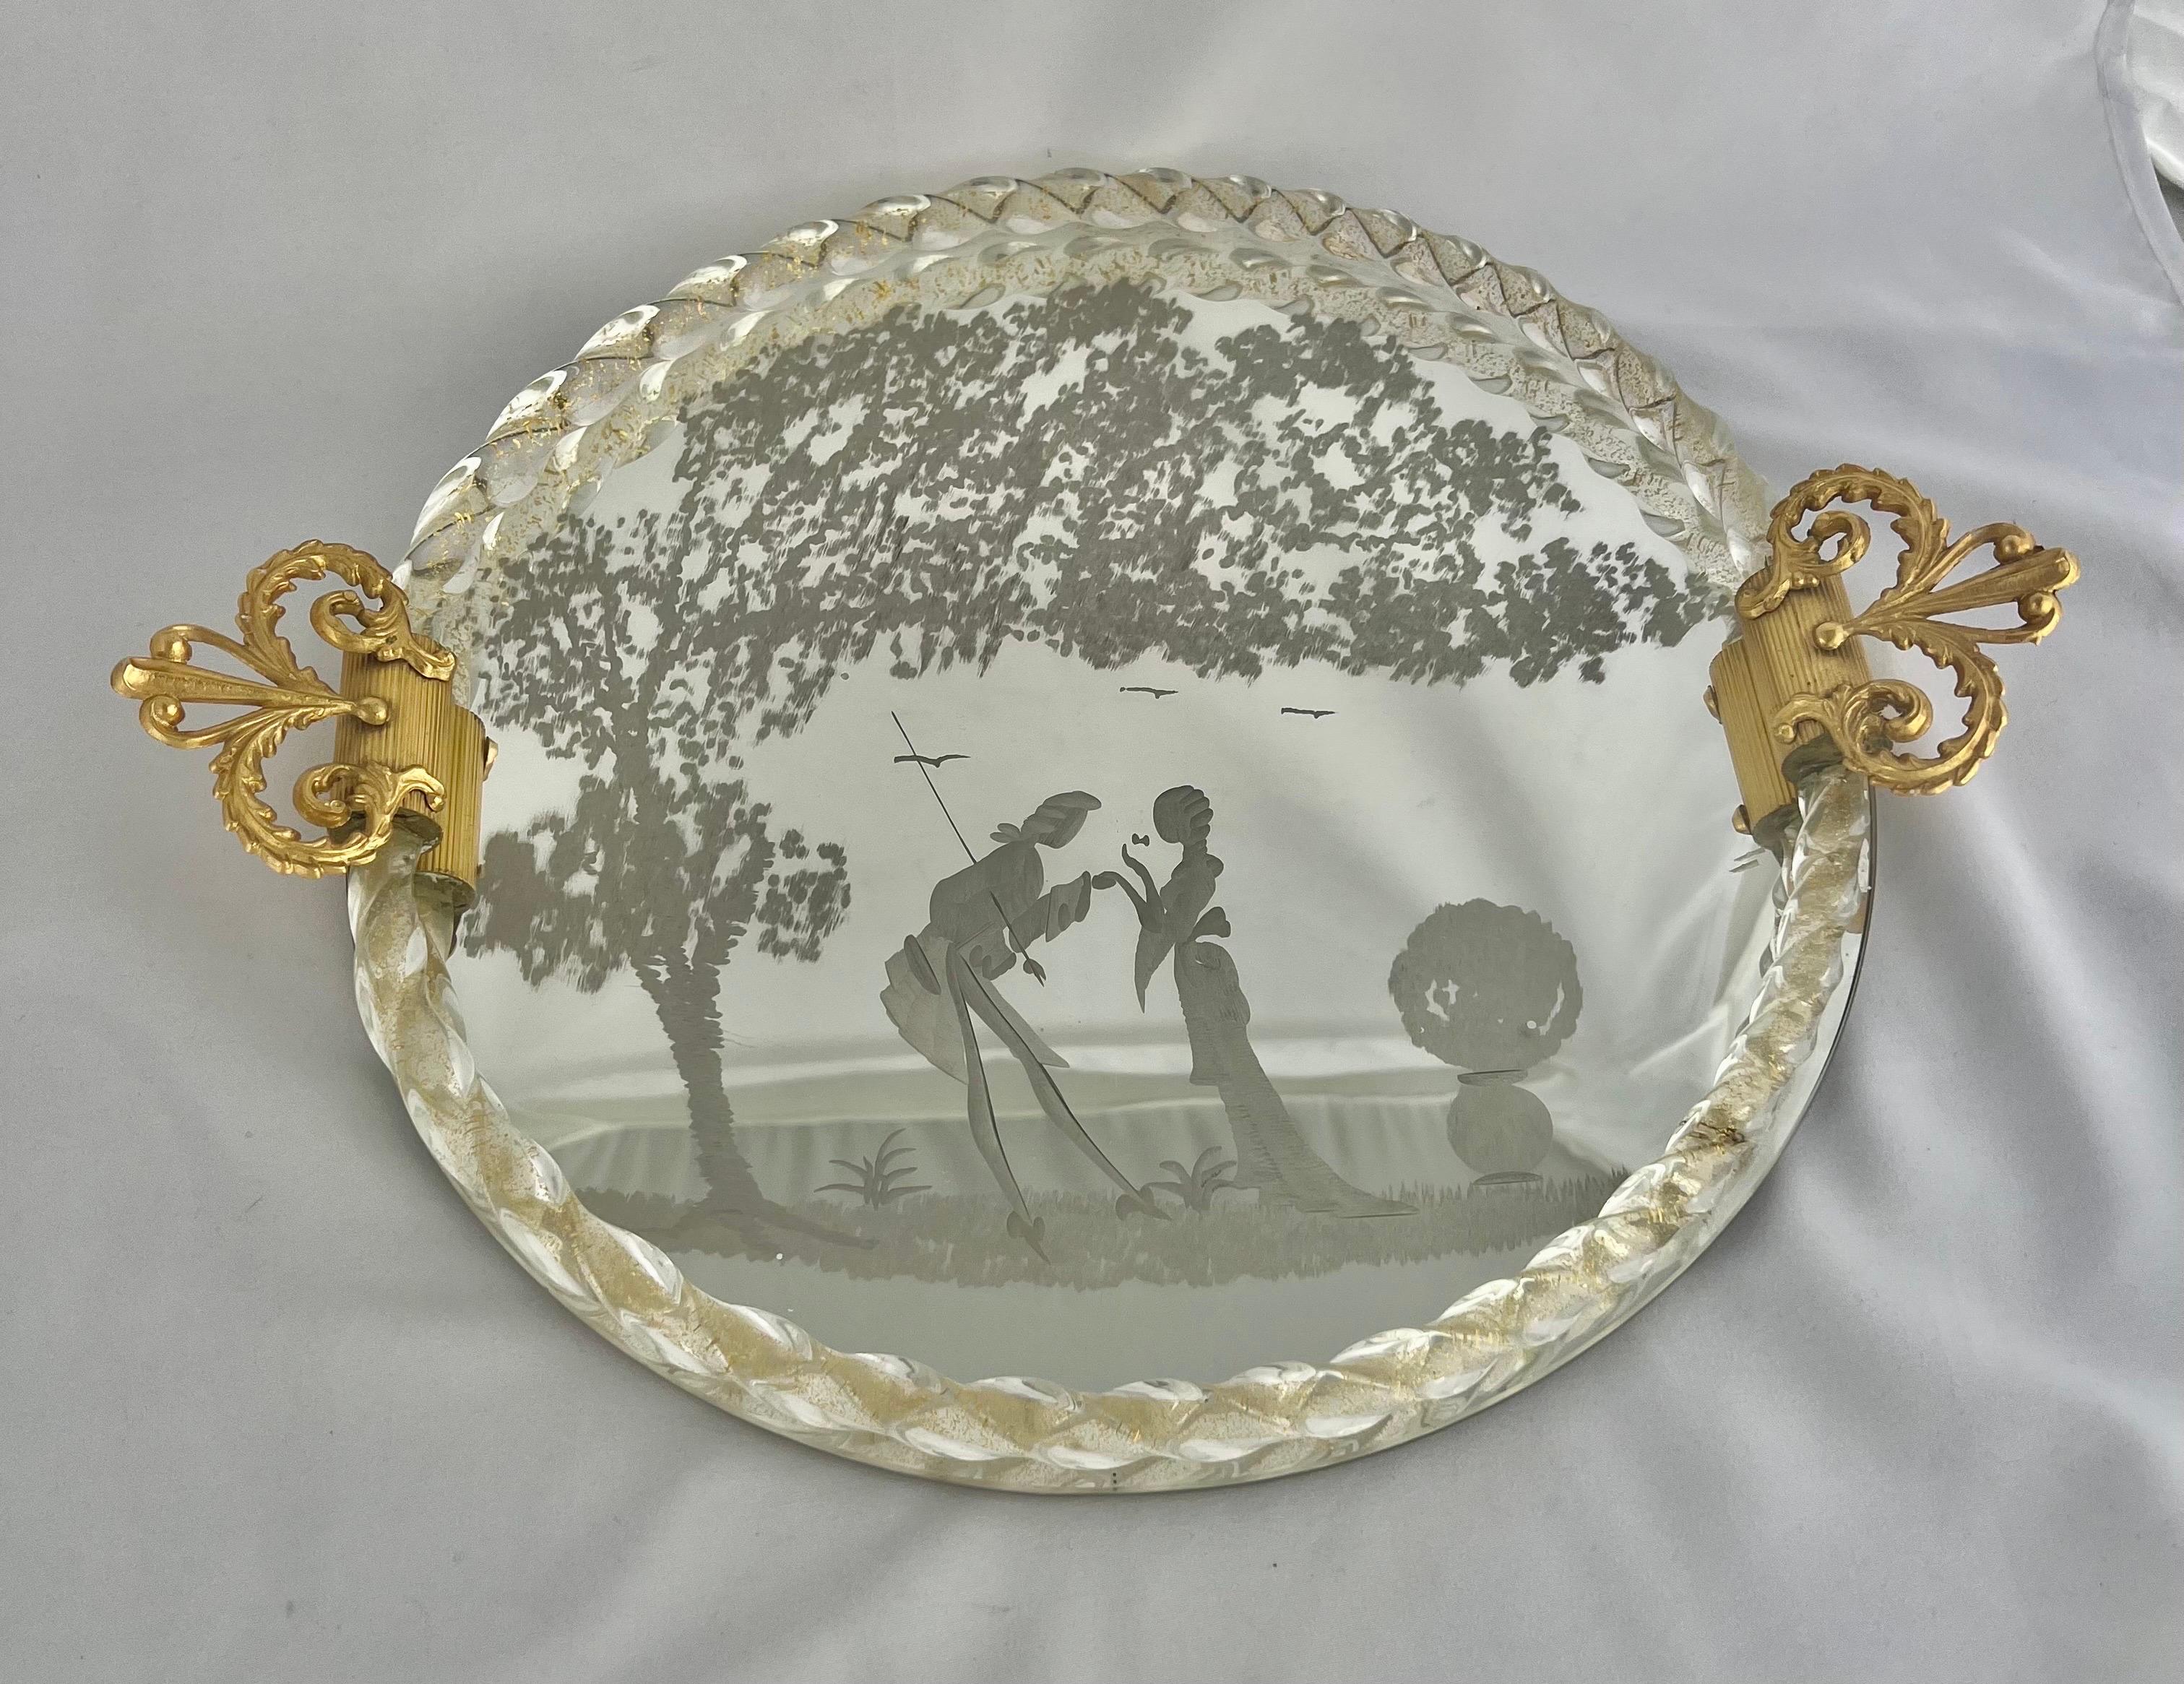 Romantic Murano glass tray. This tray features a reverse etched dancing couple in a lakeside garden under a tree. It also has a twisted rope glass border with two brass handles. The back is finished in wood with laminated veneer.